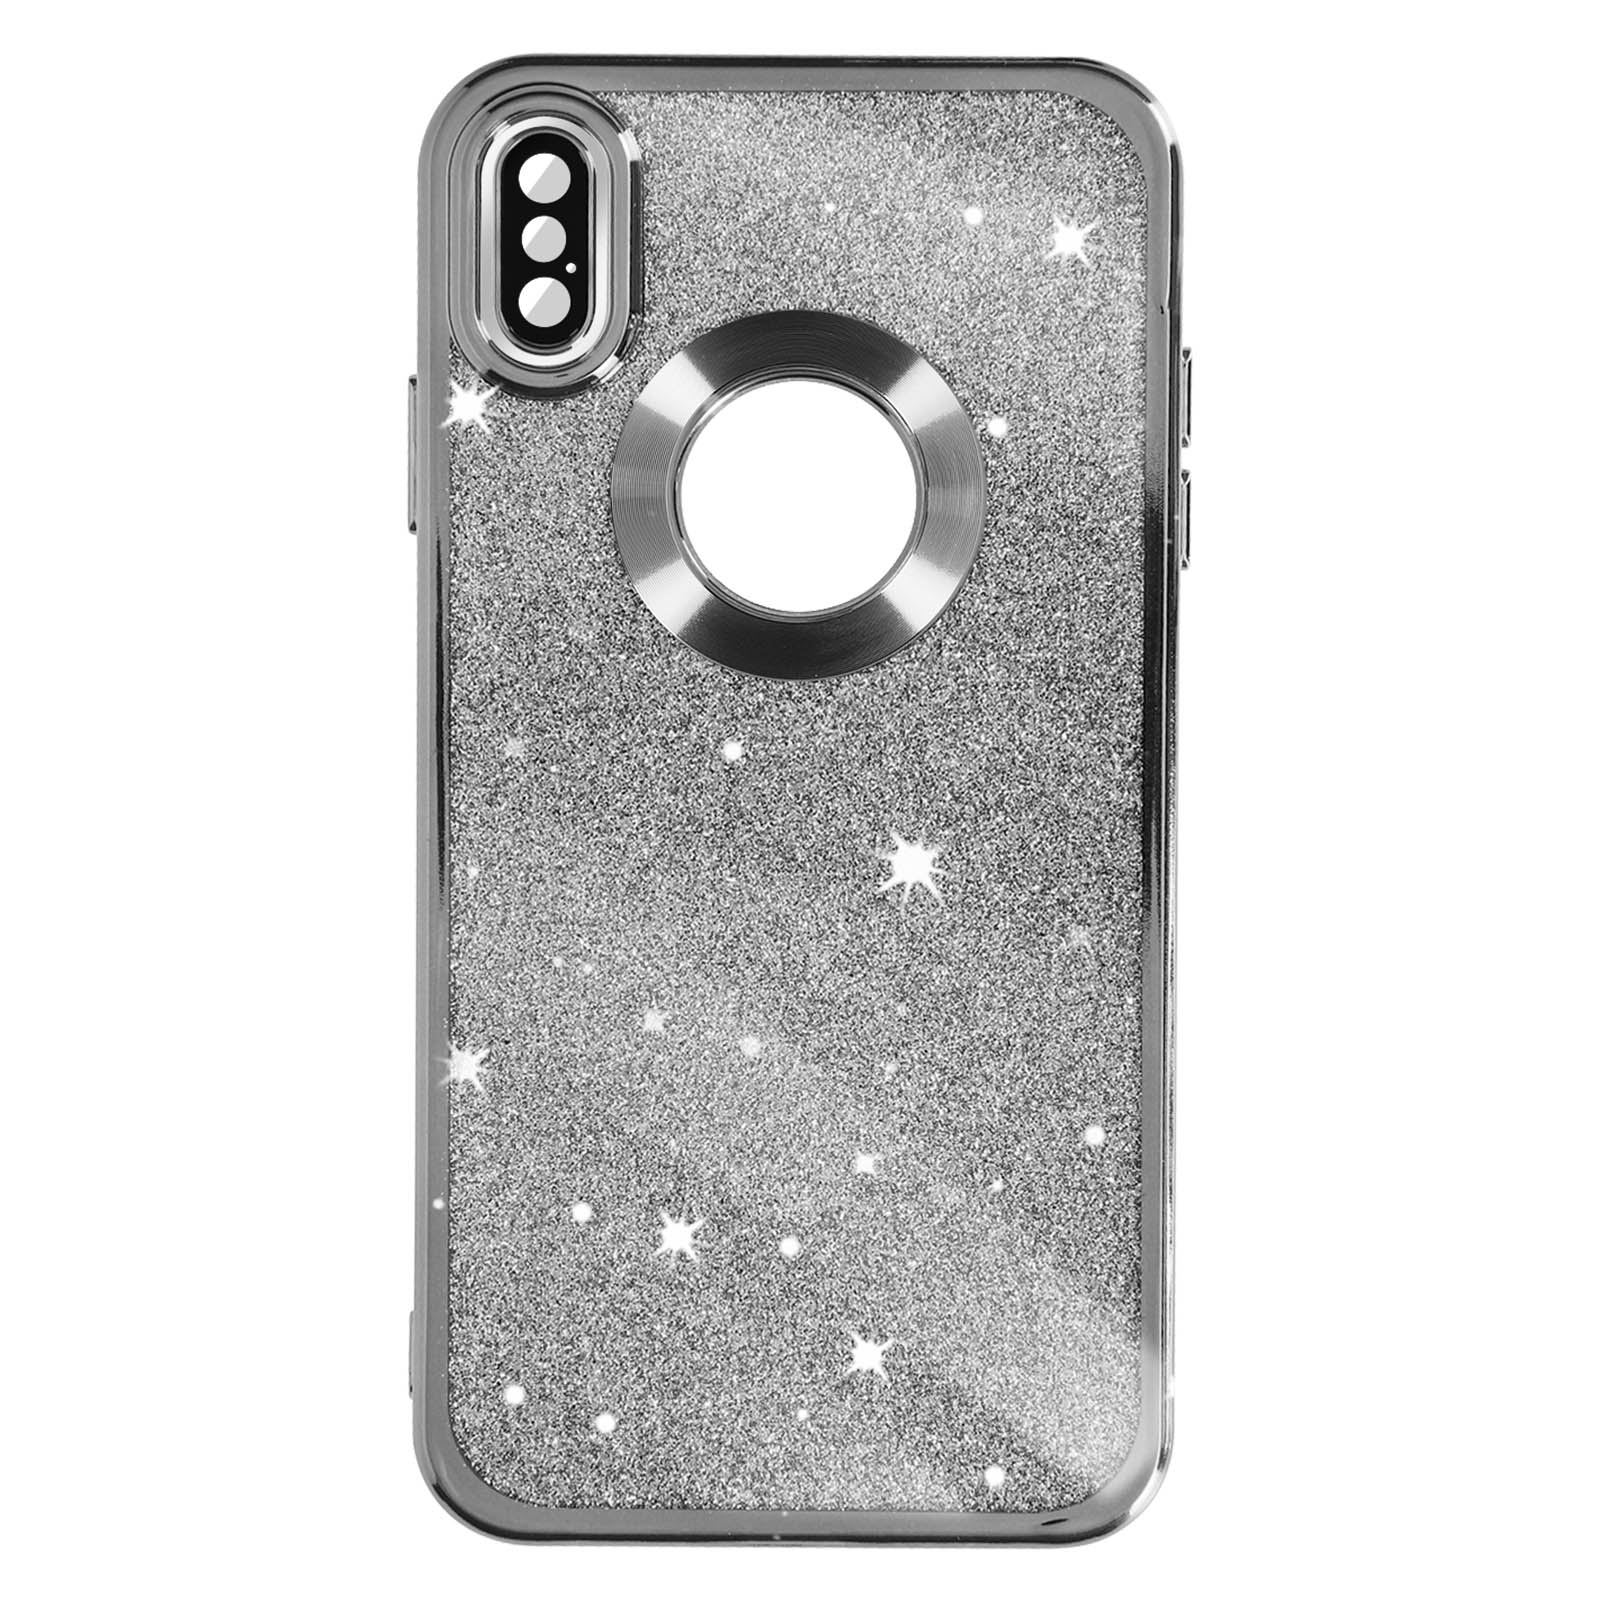 XS Apple, AVIZAR Spark Max, Silber Protecam iPhone Backcover, Series,